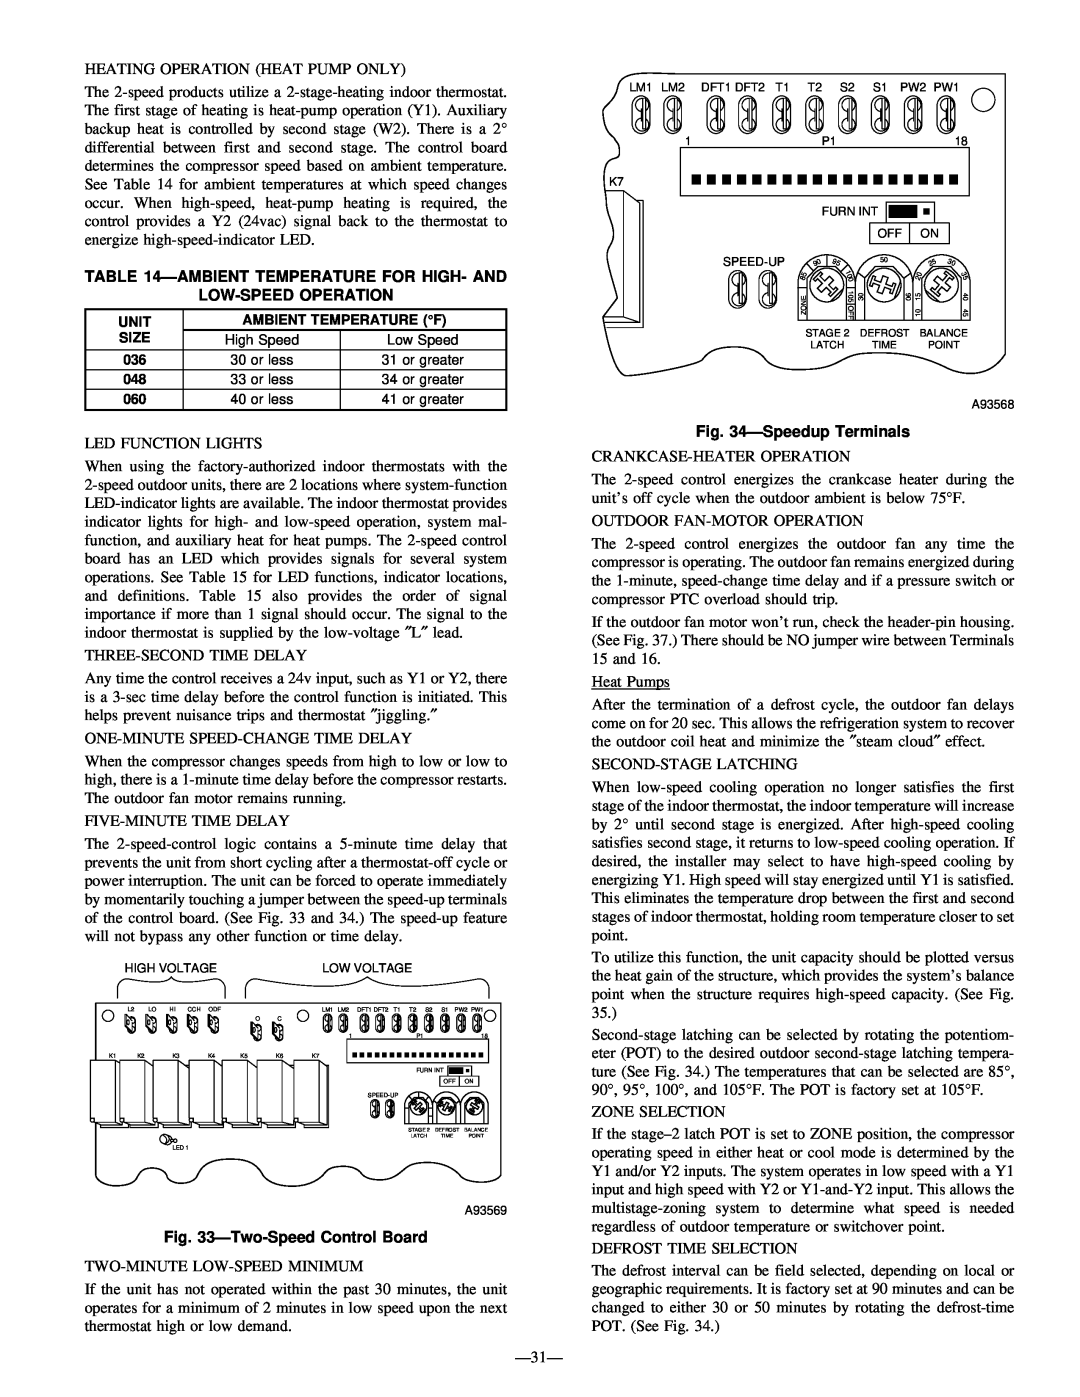 Bryant R-22 service manual Ambienttemperature For High- And, Low-Speedoperation, Two-SpeedControl Board, SpeedupTerminals 